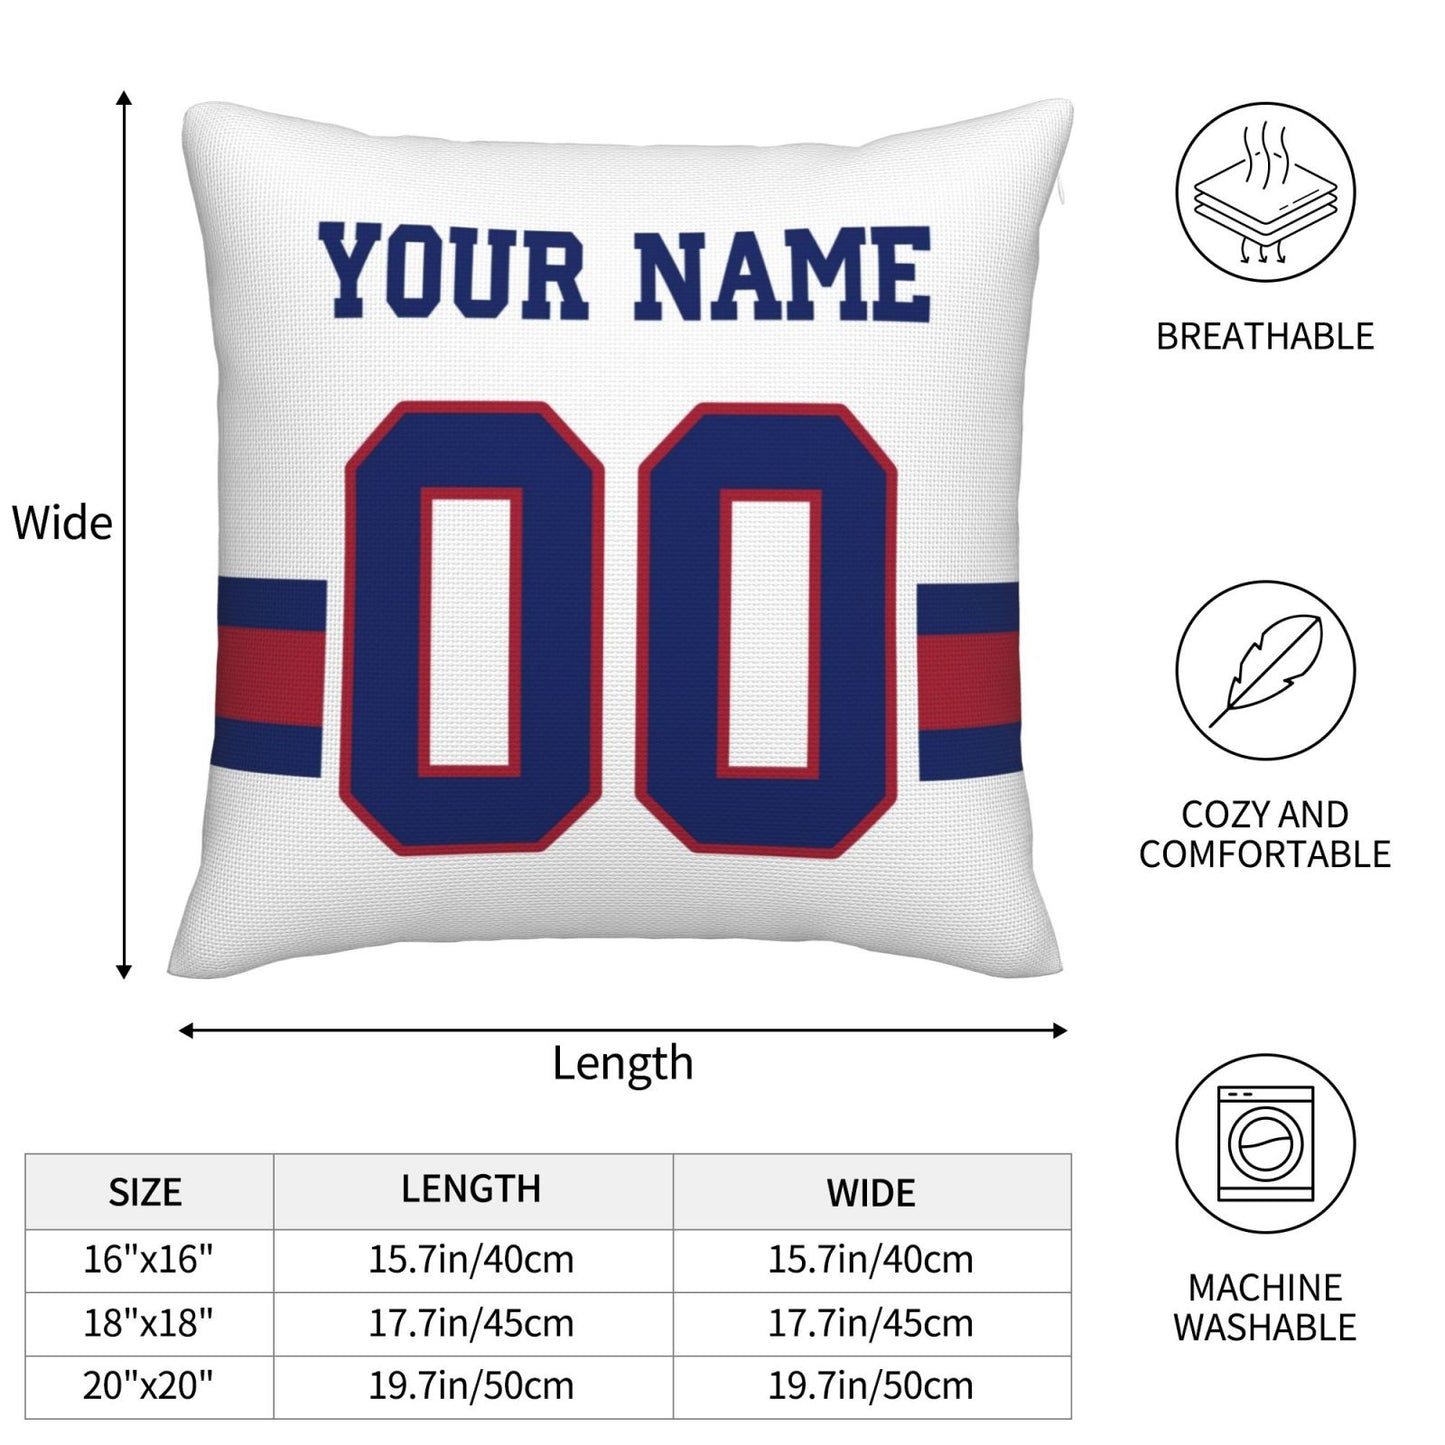 Custom White New York Giants Decorative Throw Pillow Case - Print Personalized Football Team Fans Name & Number Birthday Gift